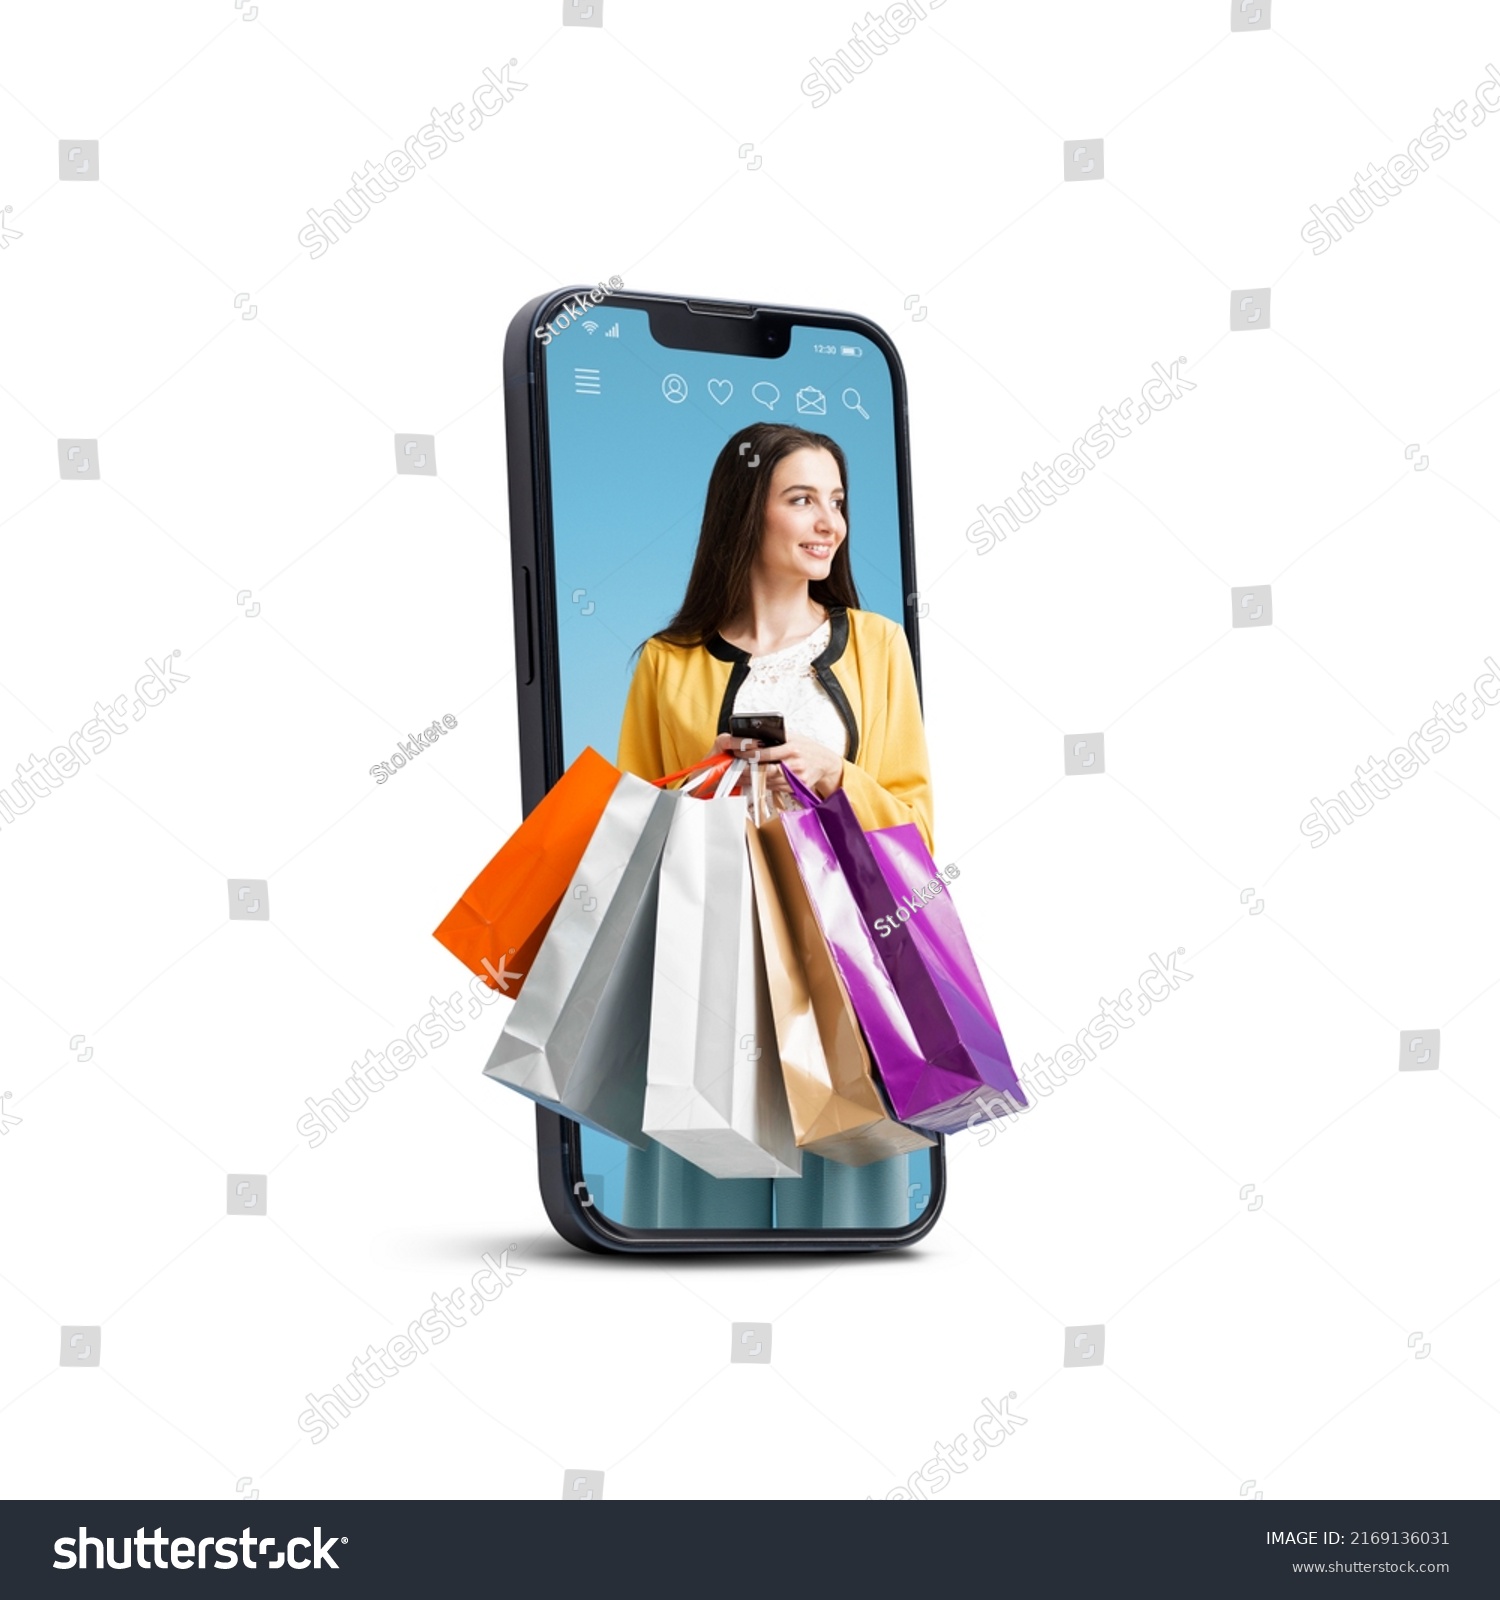 Happy young woman holding many shopping bags in a smartphone screen, online shopping offers, isolated on white background #2169136031